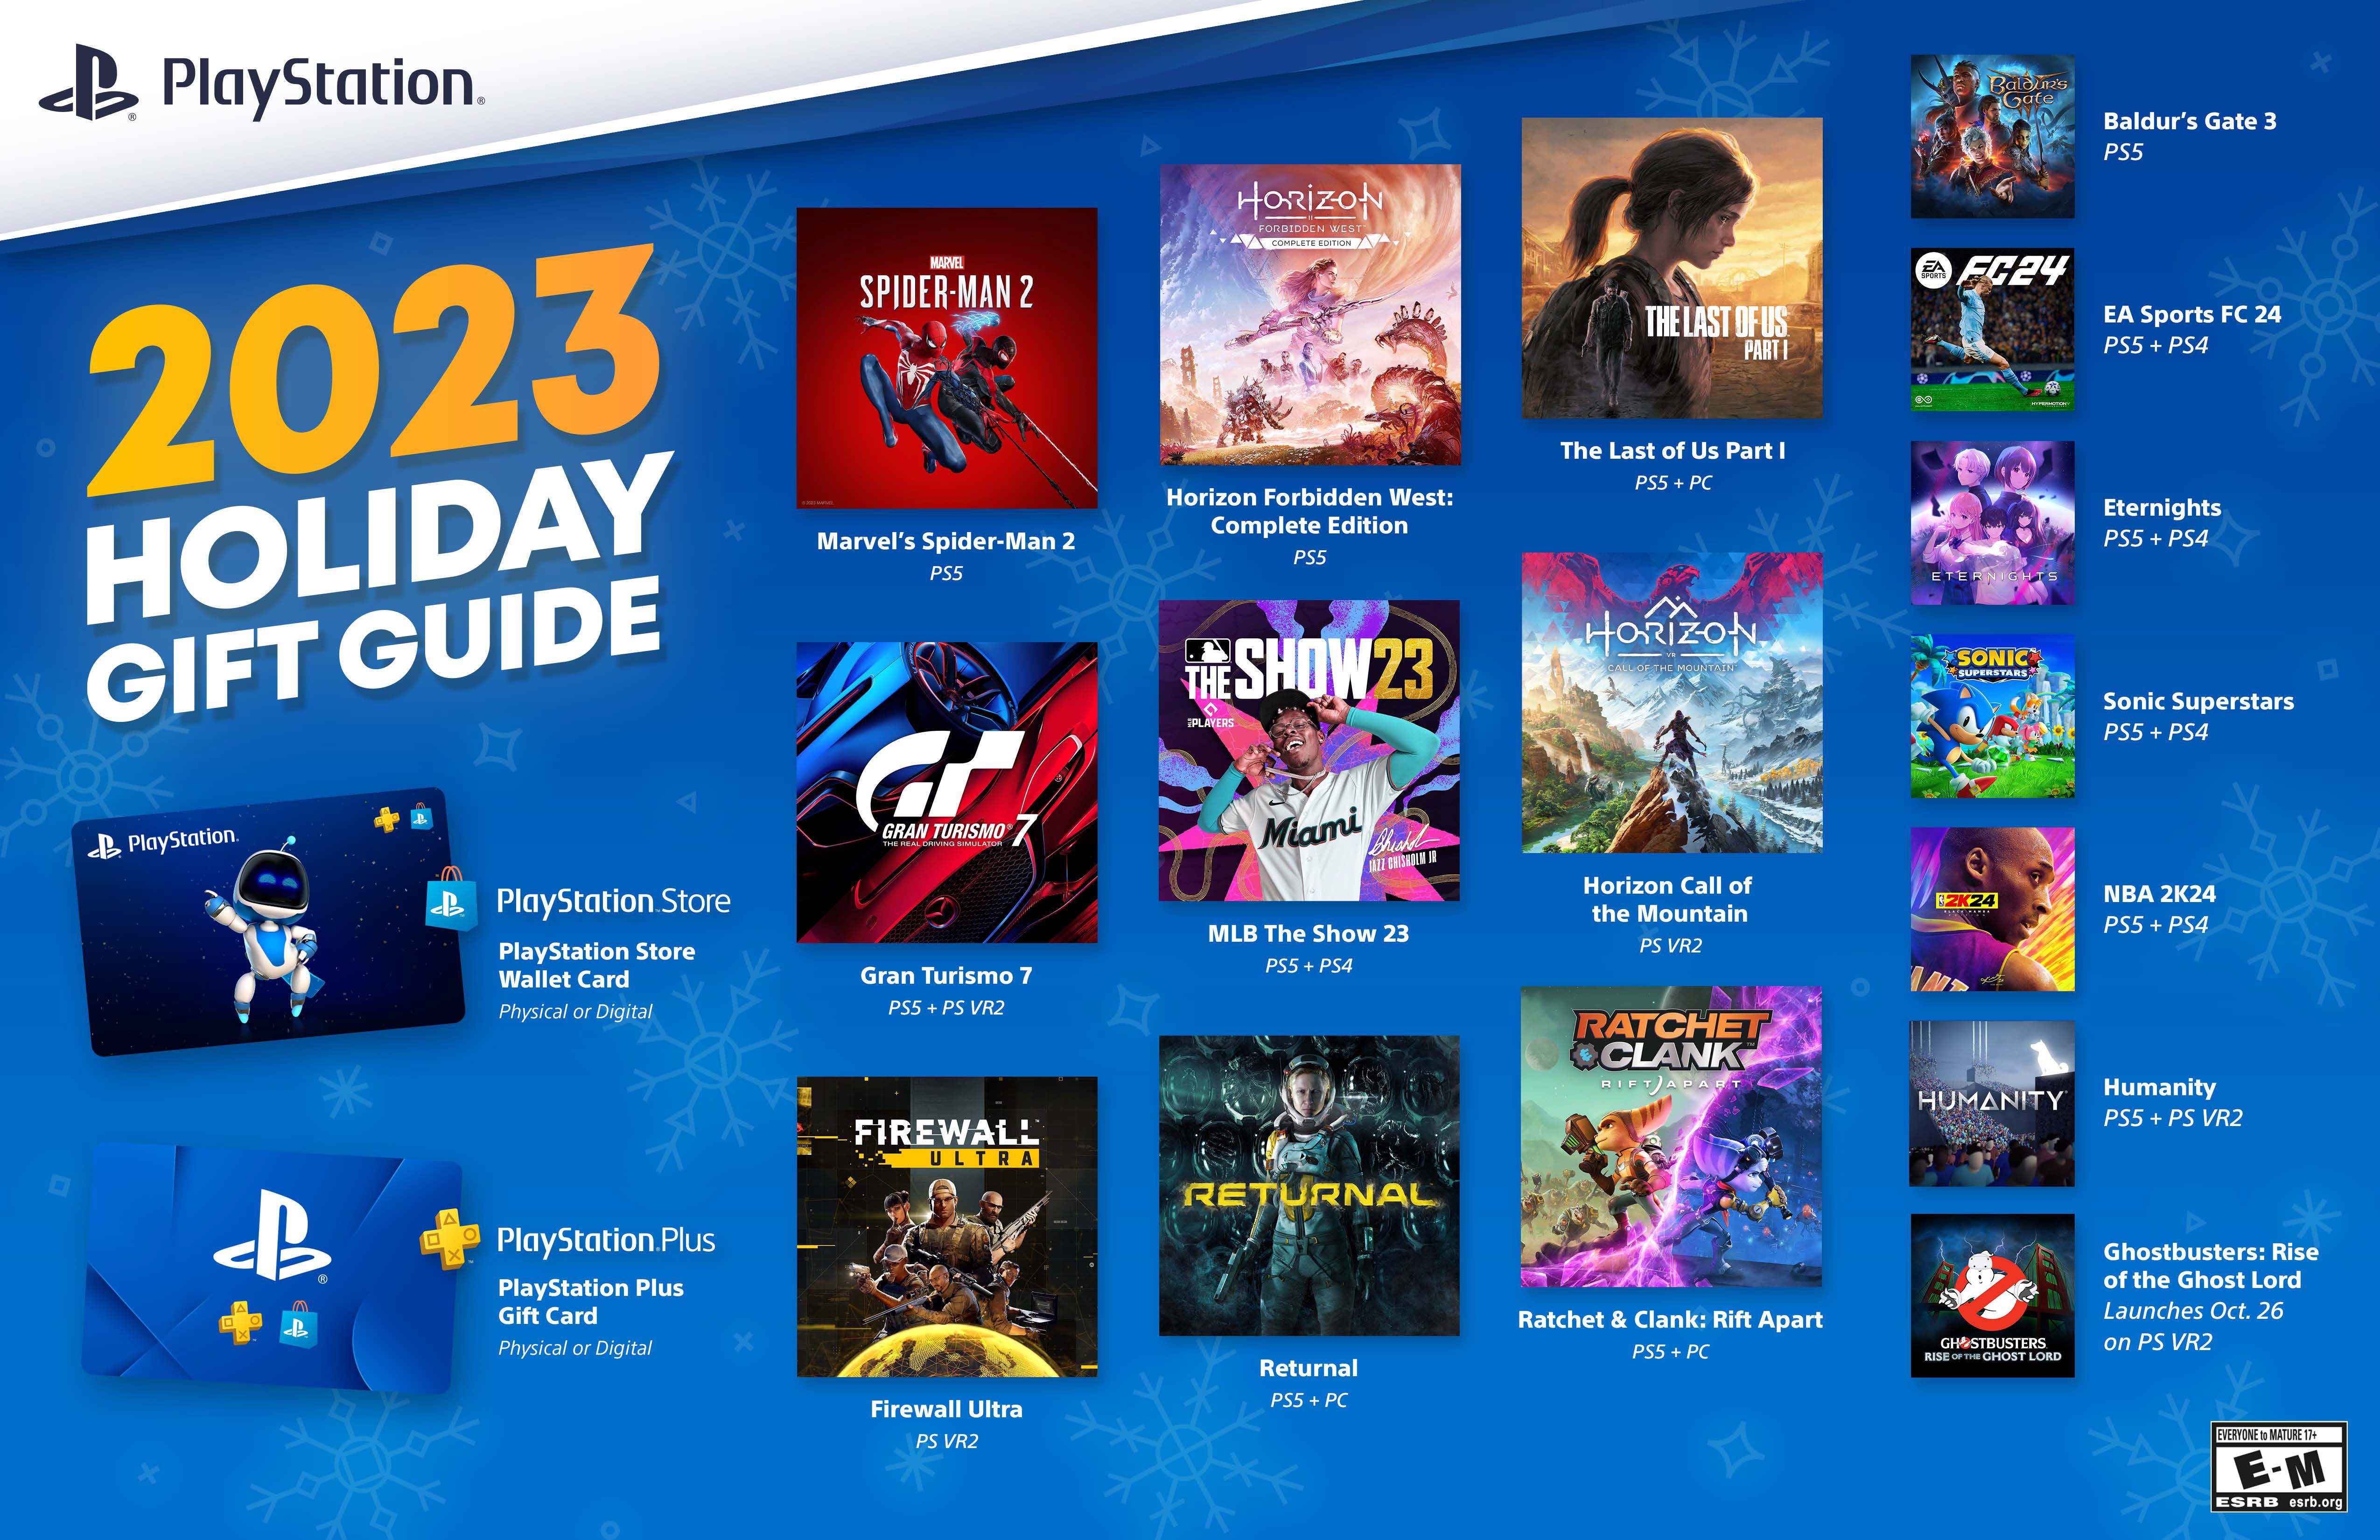 New look for PS5 console this holiday season : r/Games